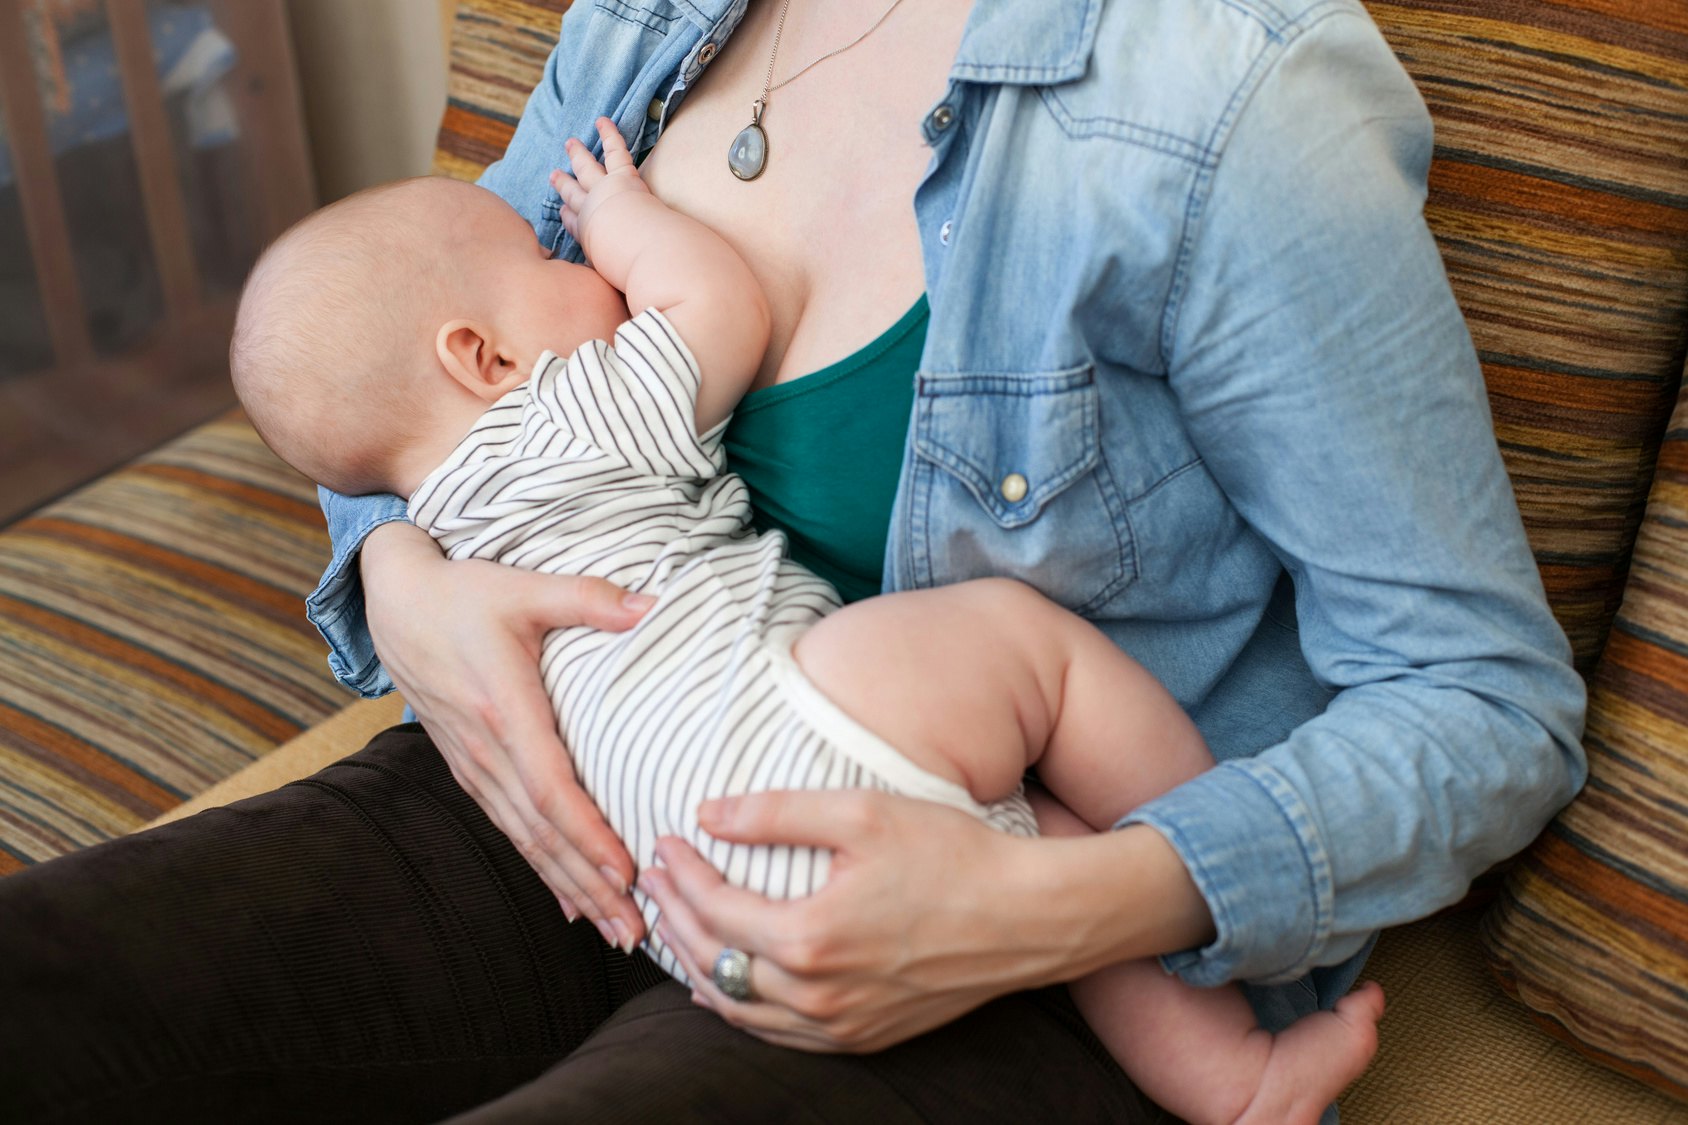 Does Breastfeeding Change The Way Your Vagina Smells? A Lactation Consultant Explains image